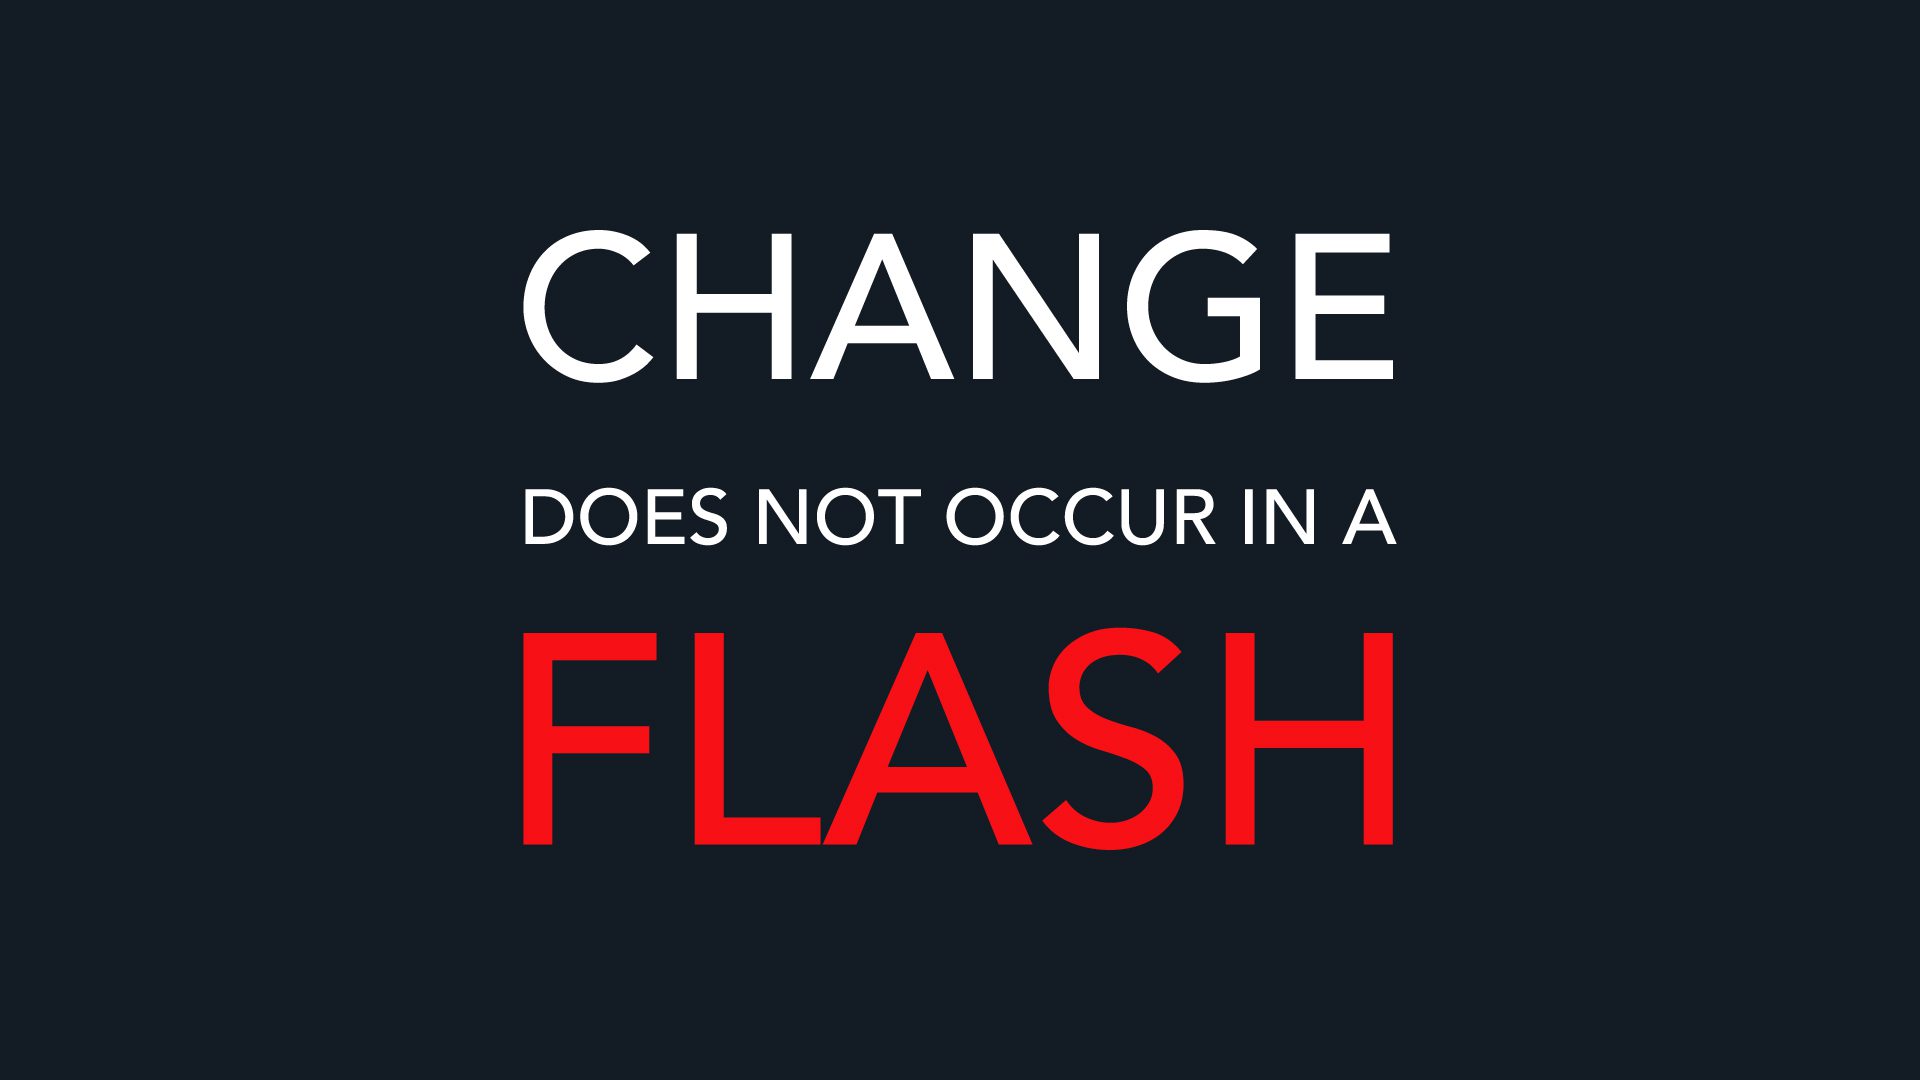 Change does not occur in a flash